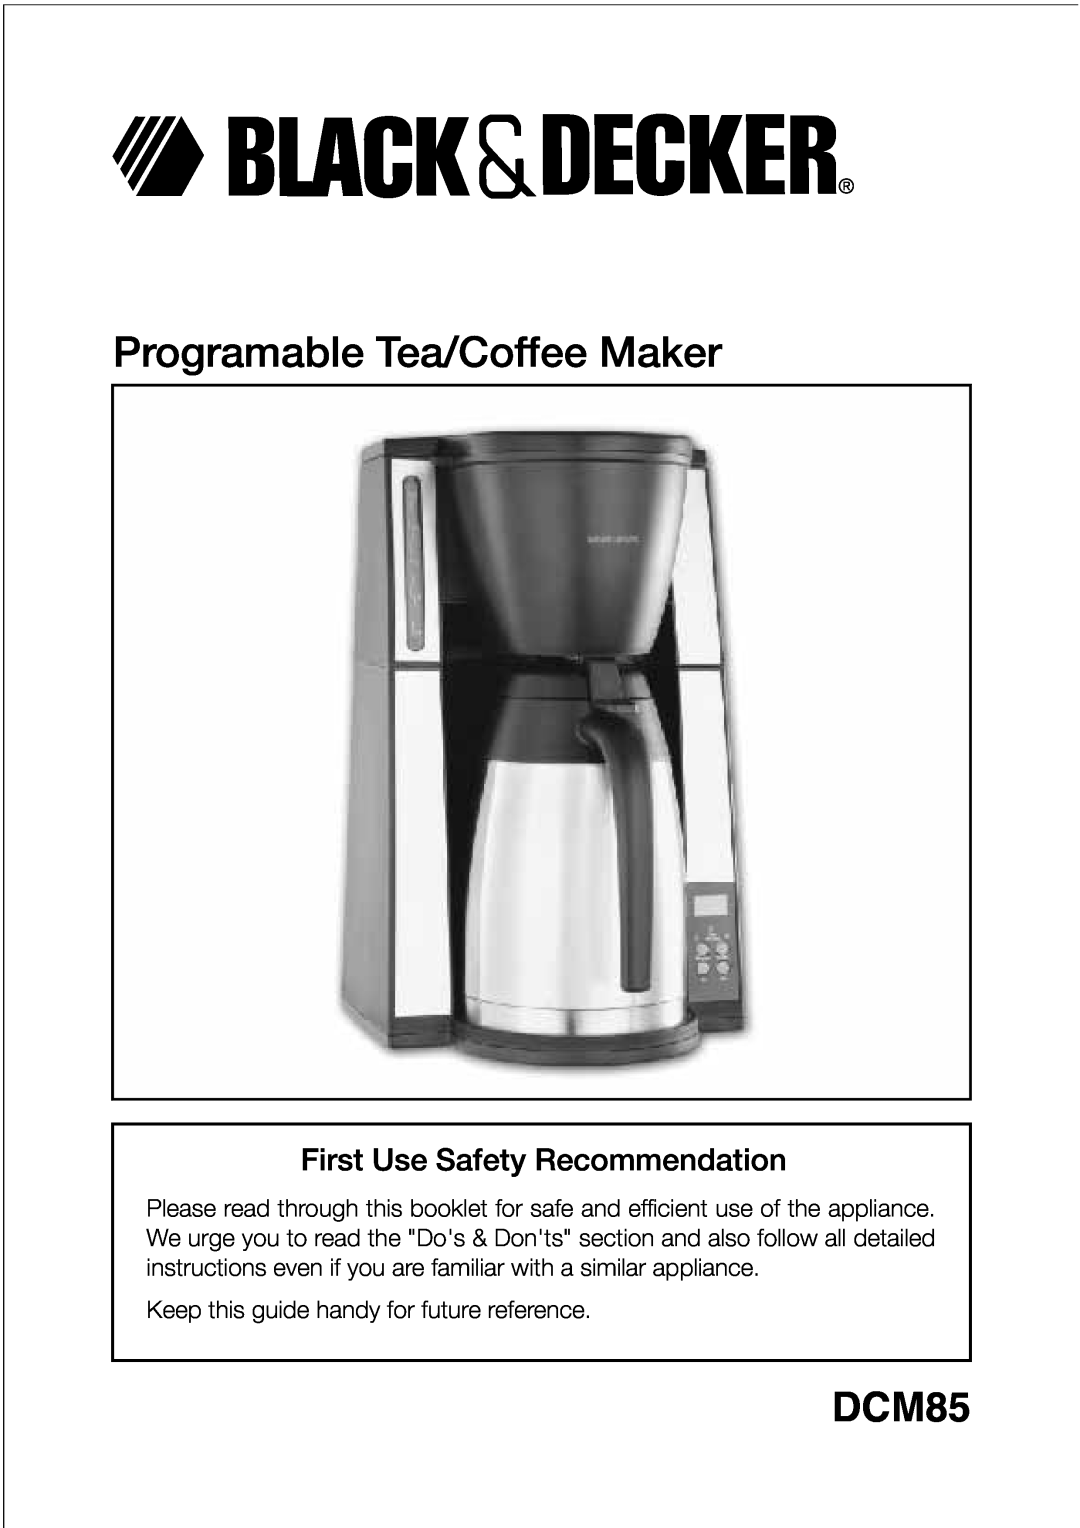 Black & Decker DCM85 manual Programable Tea/Coffee Maker, First Use Safety Recommendation 